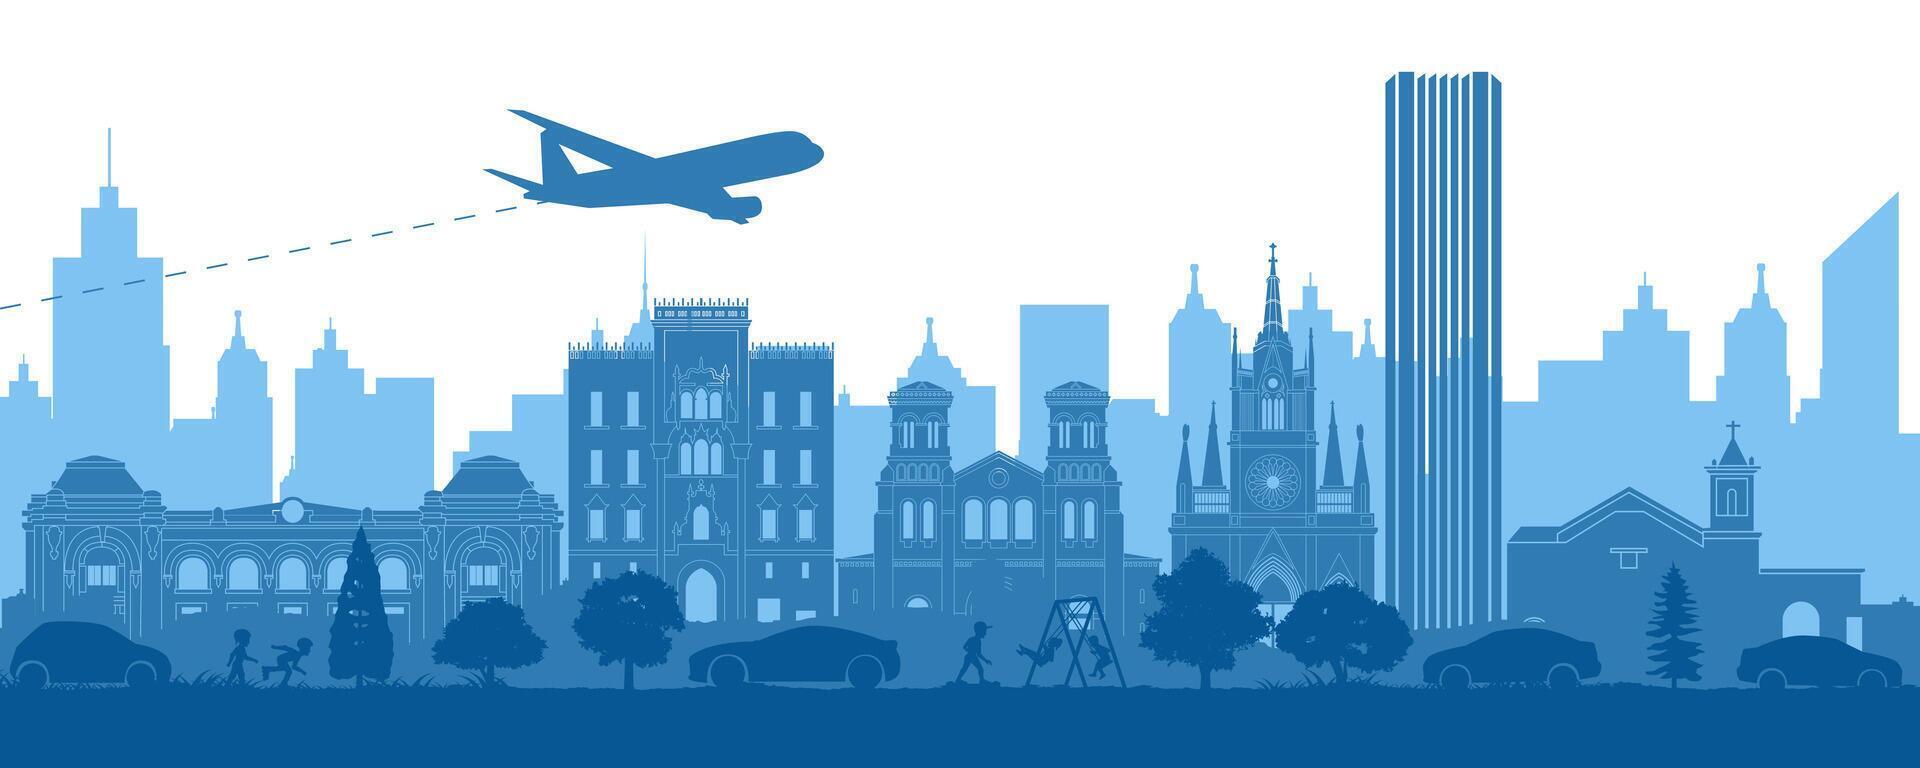 Colombia famous landmark silhouette style vector